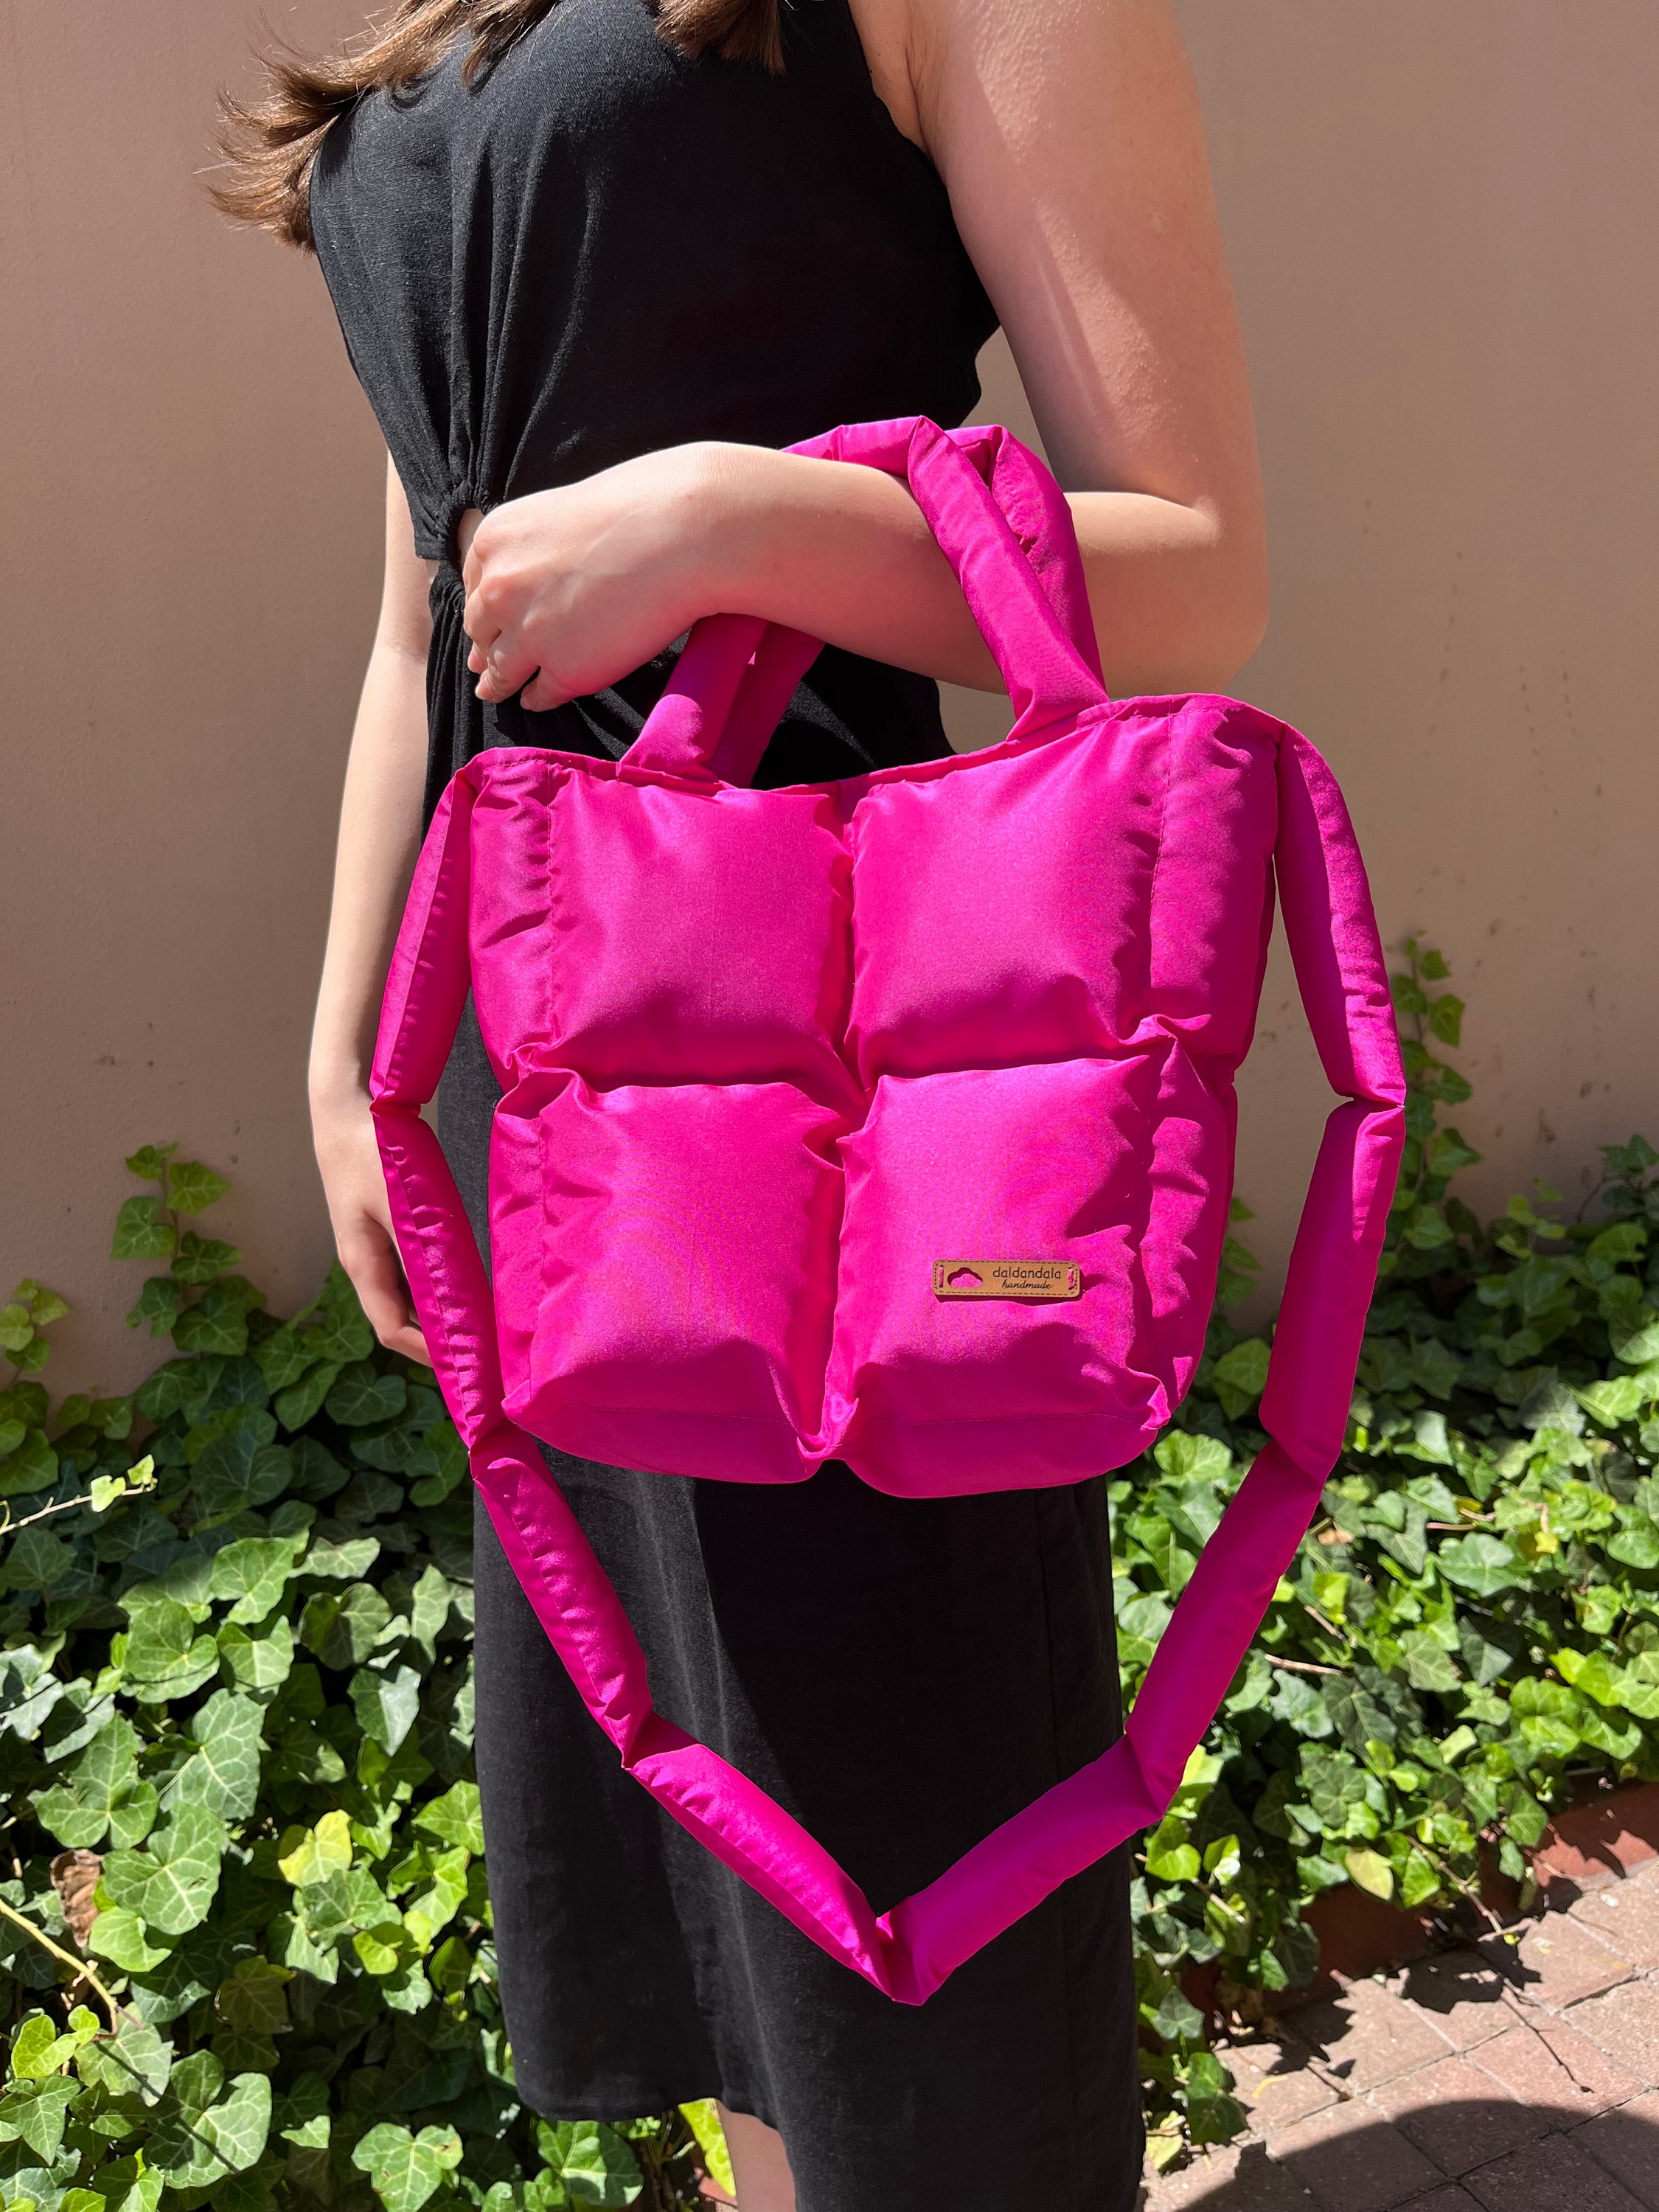 Deux Lux, Bags, Fusia Hand Bag Used